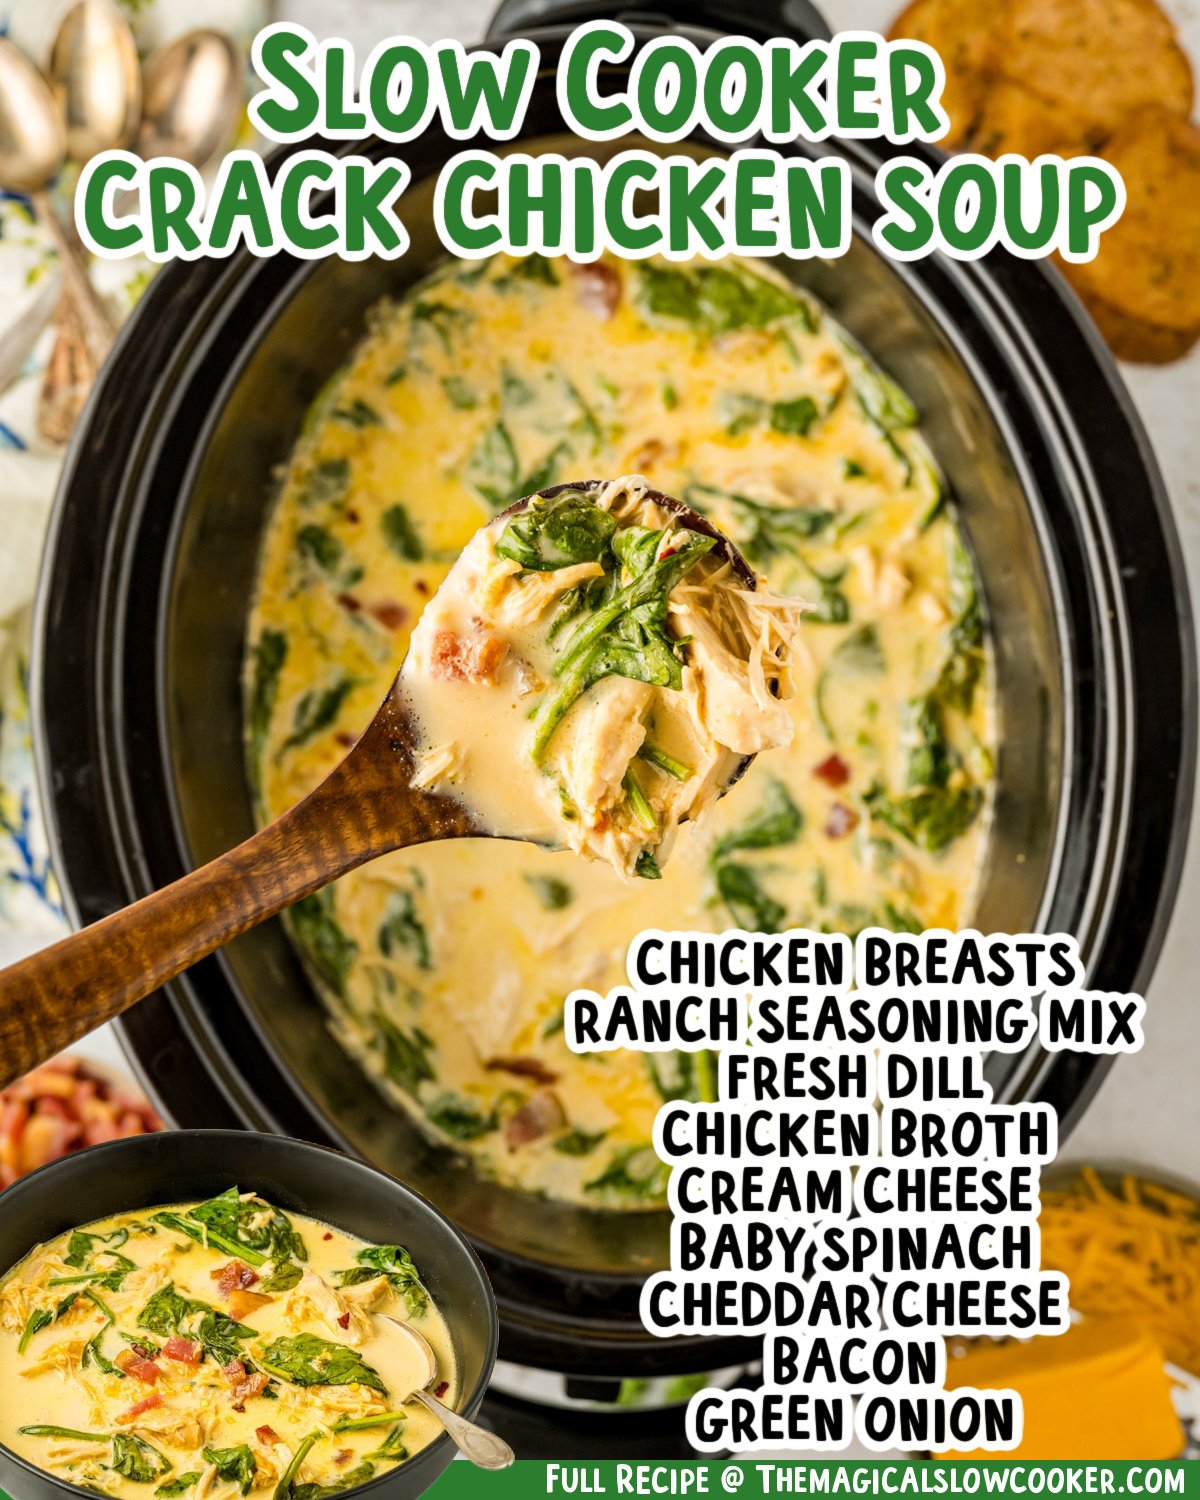 two images of slow cooker crack chicken soup with text list of ingredients.